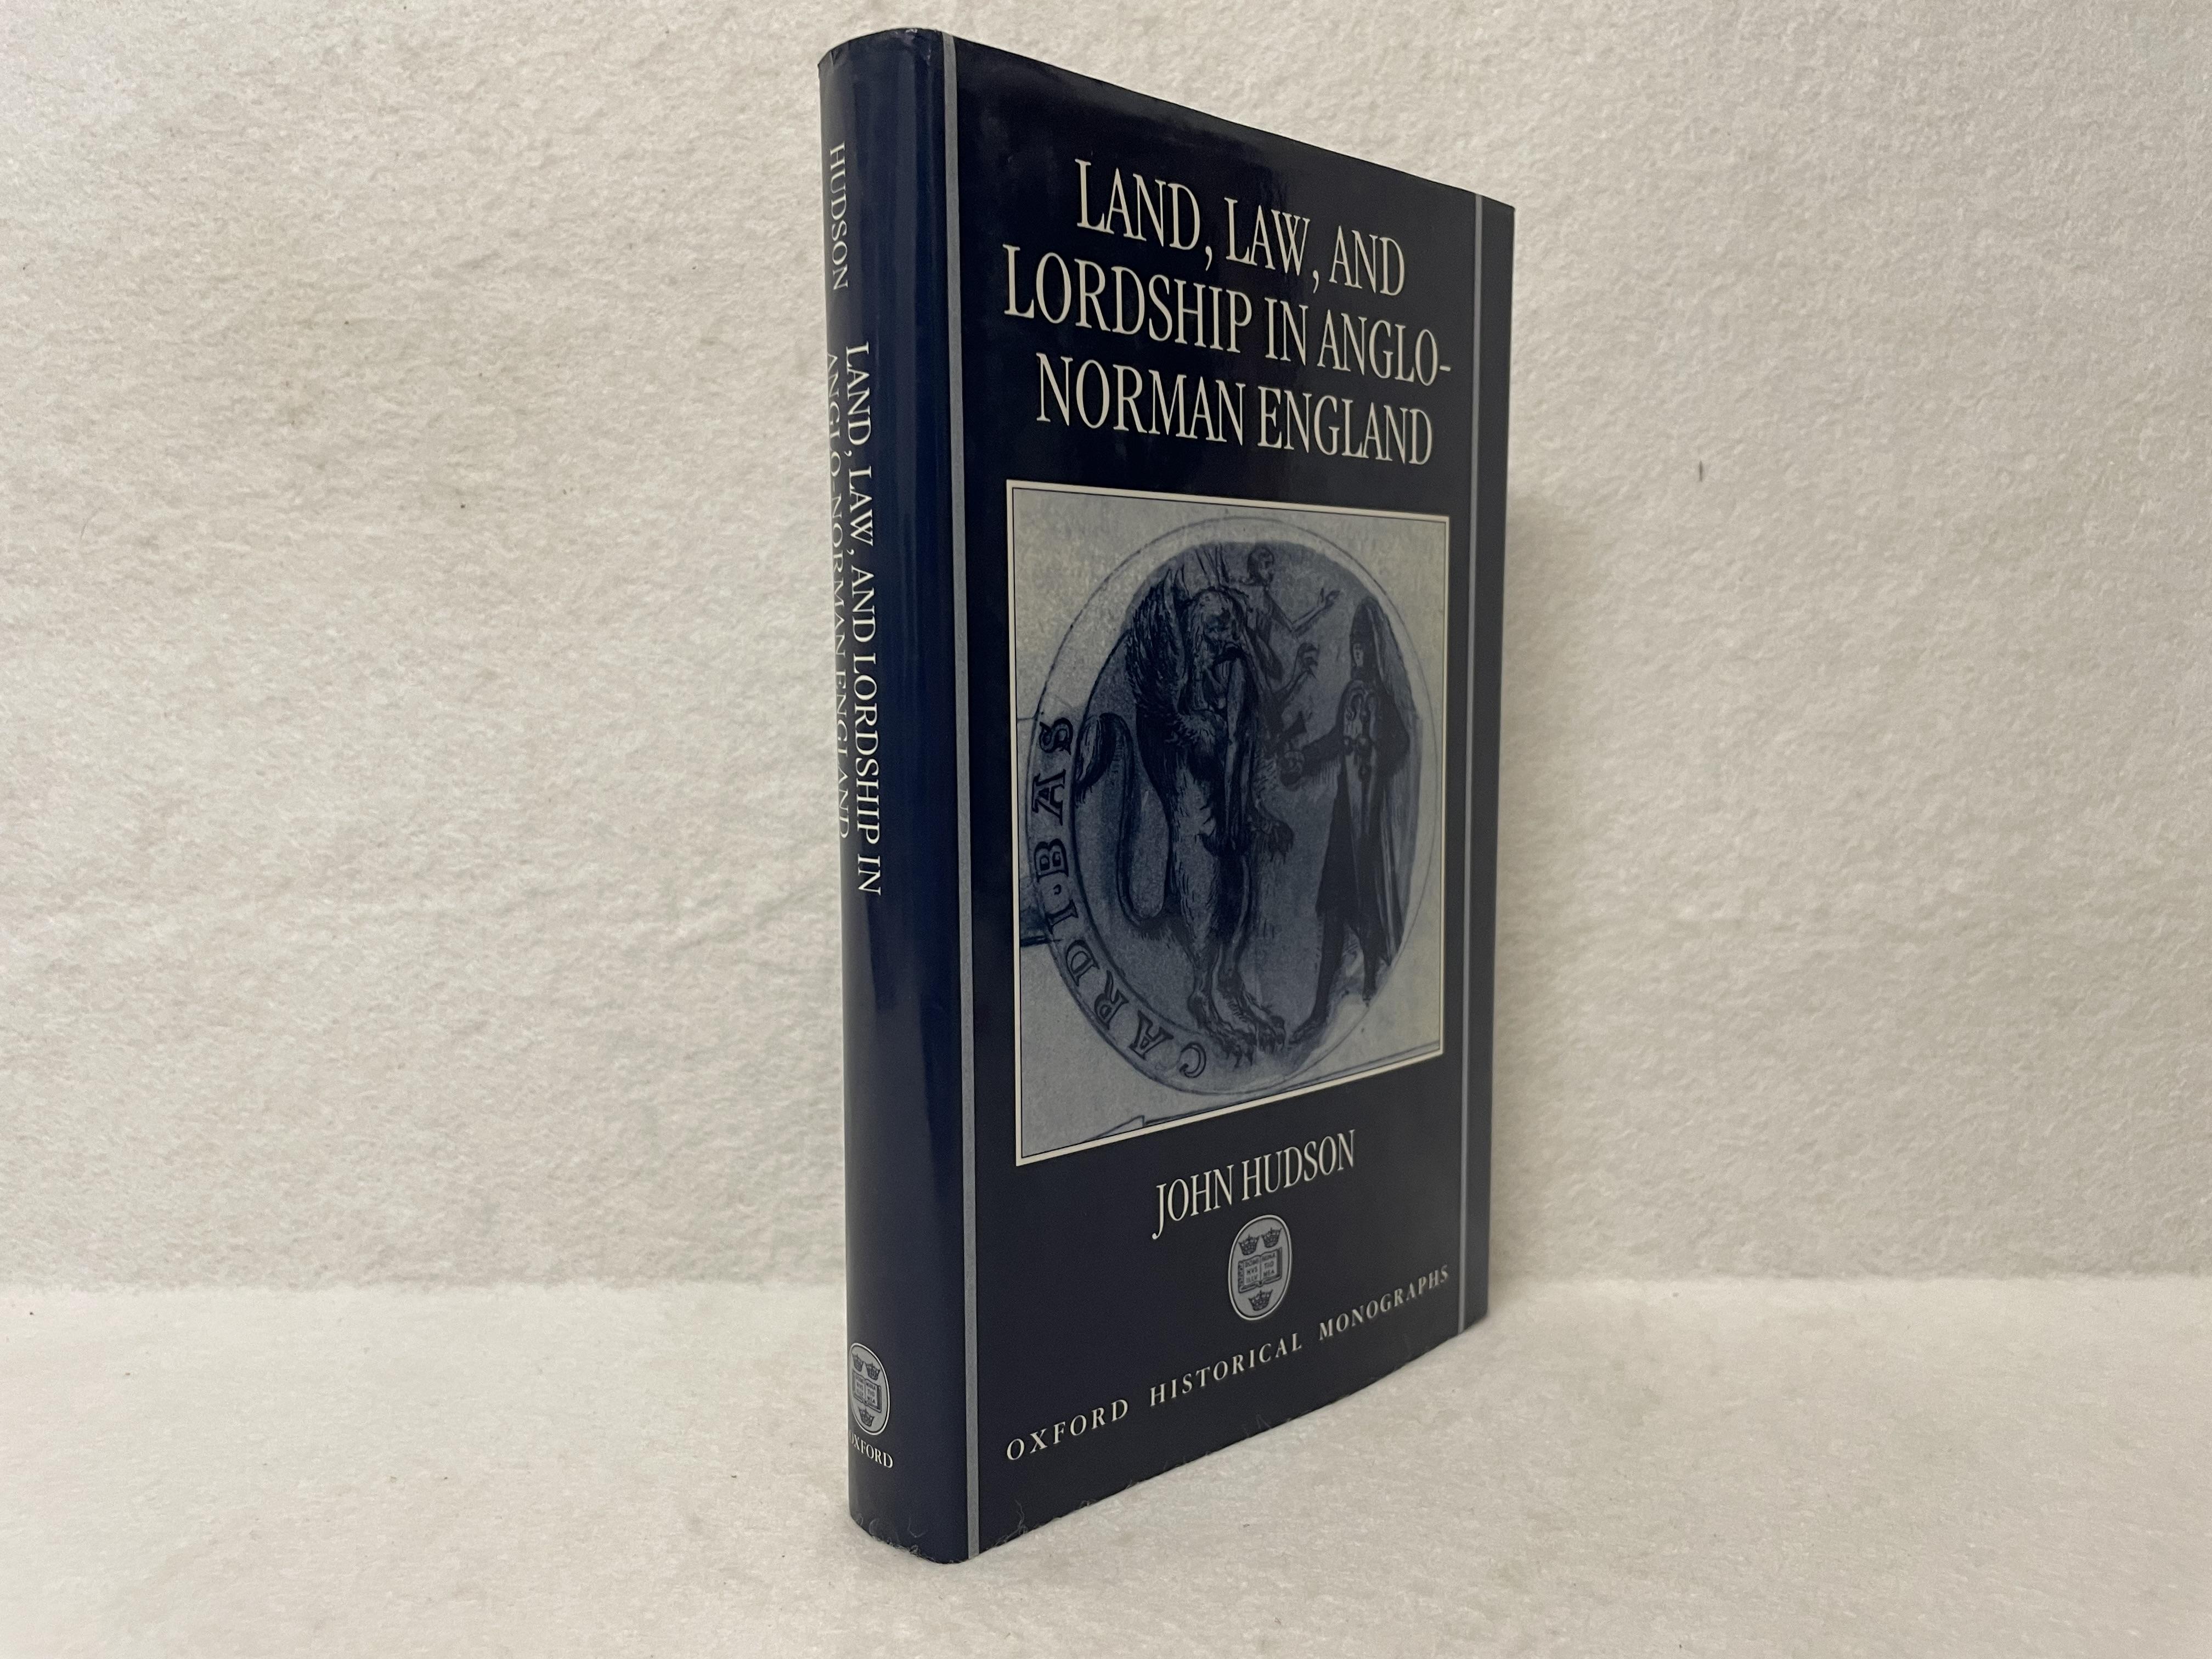 Land, Law, and Lordship in Anglo-Norman England - HUDSON, John